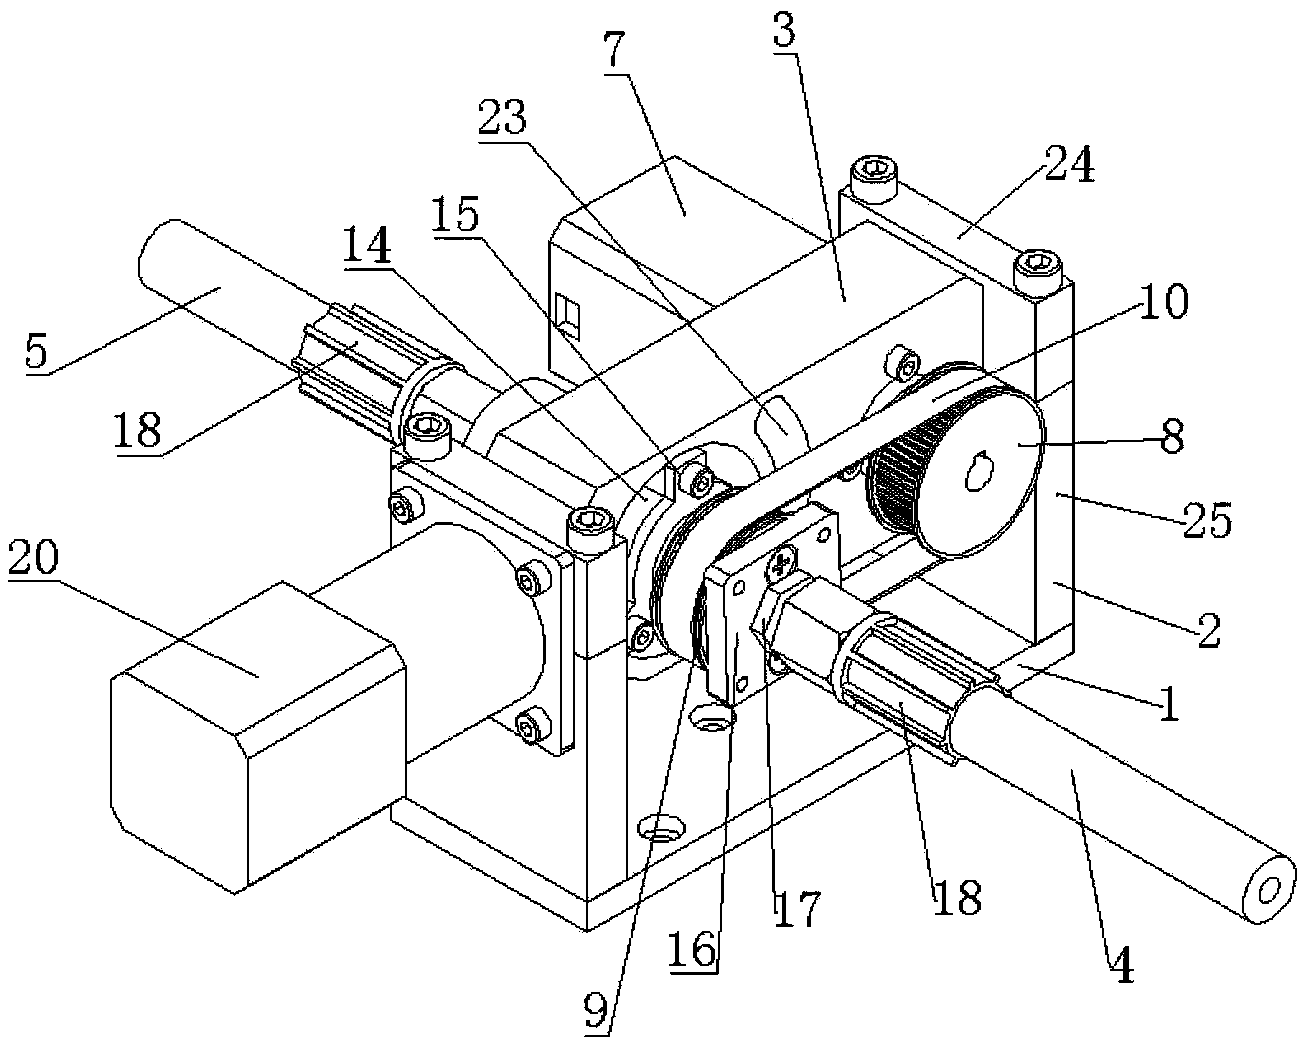 Multi-dimensional gearing for cleaning equipment